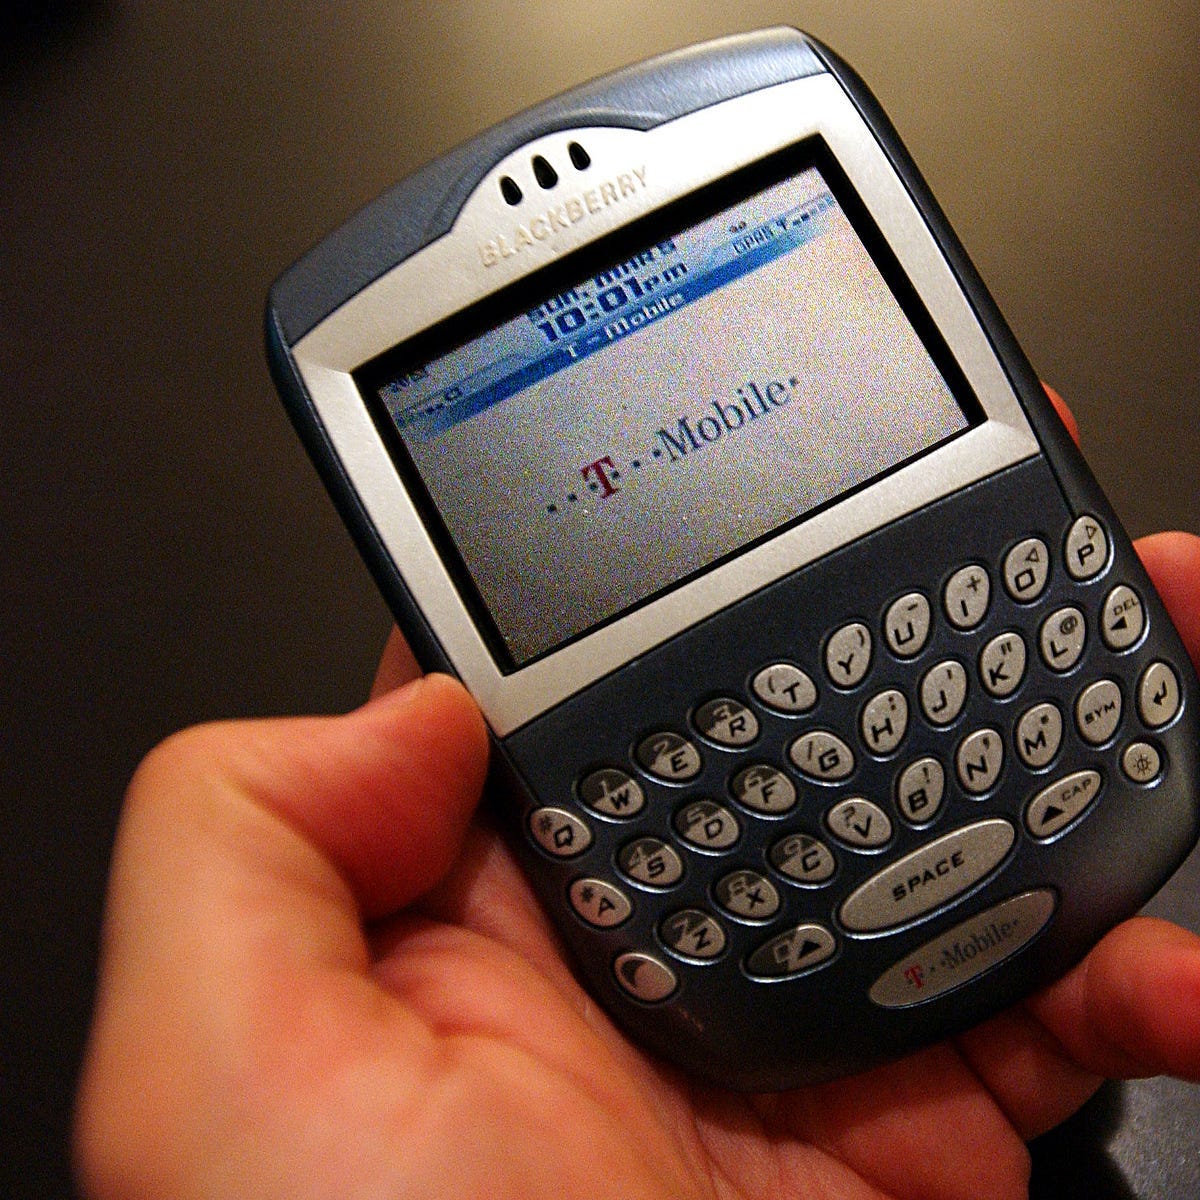 The Original BlackBerry Was Ahead of Its Time | by Tareq Ismail | OneZero